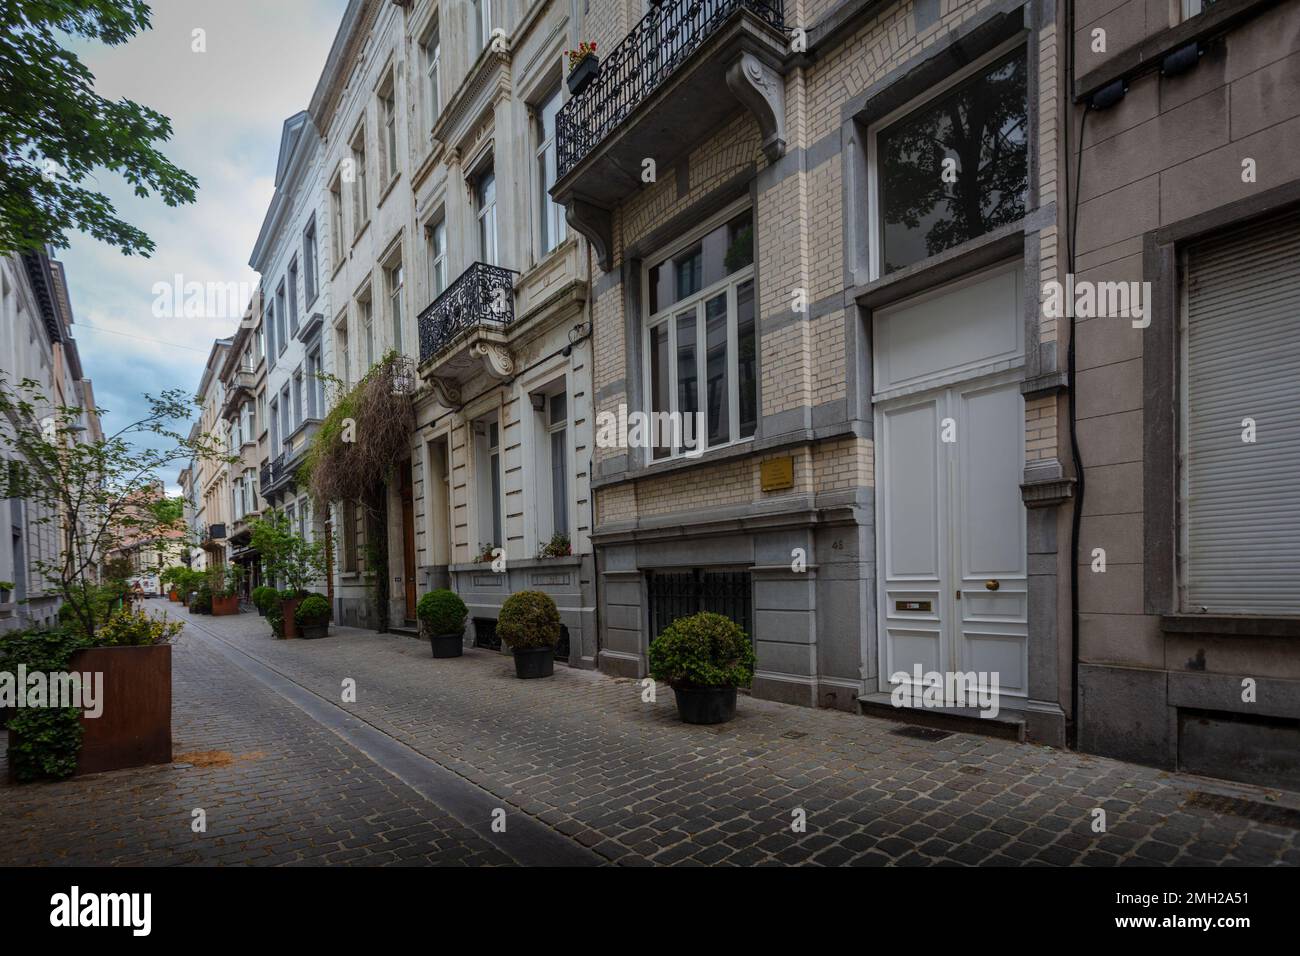 Birthplace of the actress Audrey Hepburn in Brussels. There is a golden plaque on the wall of the house in the street Rue Keyenveld, Ixelles. Belgium. Stock Photo